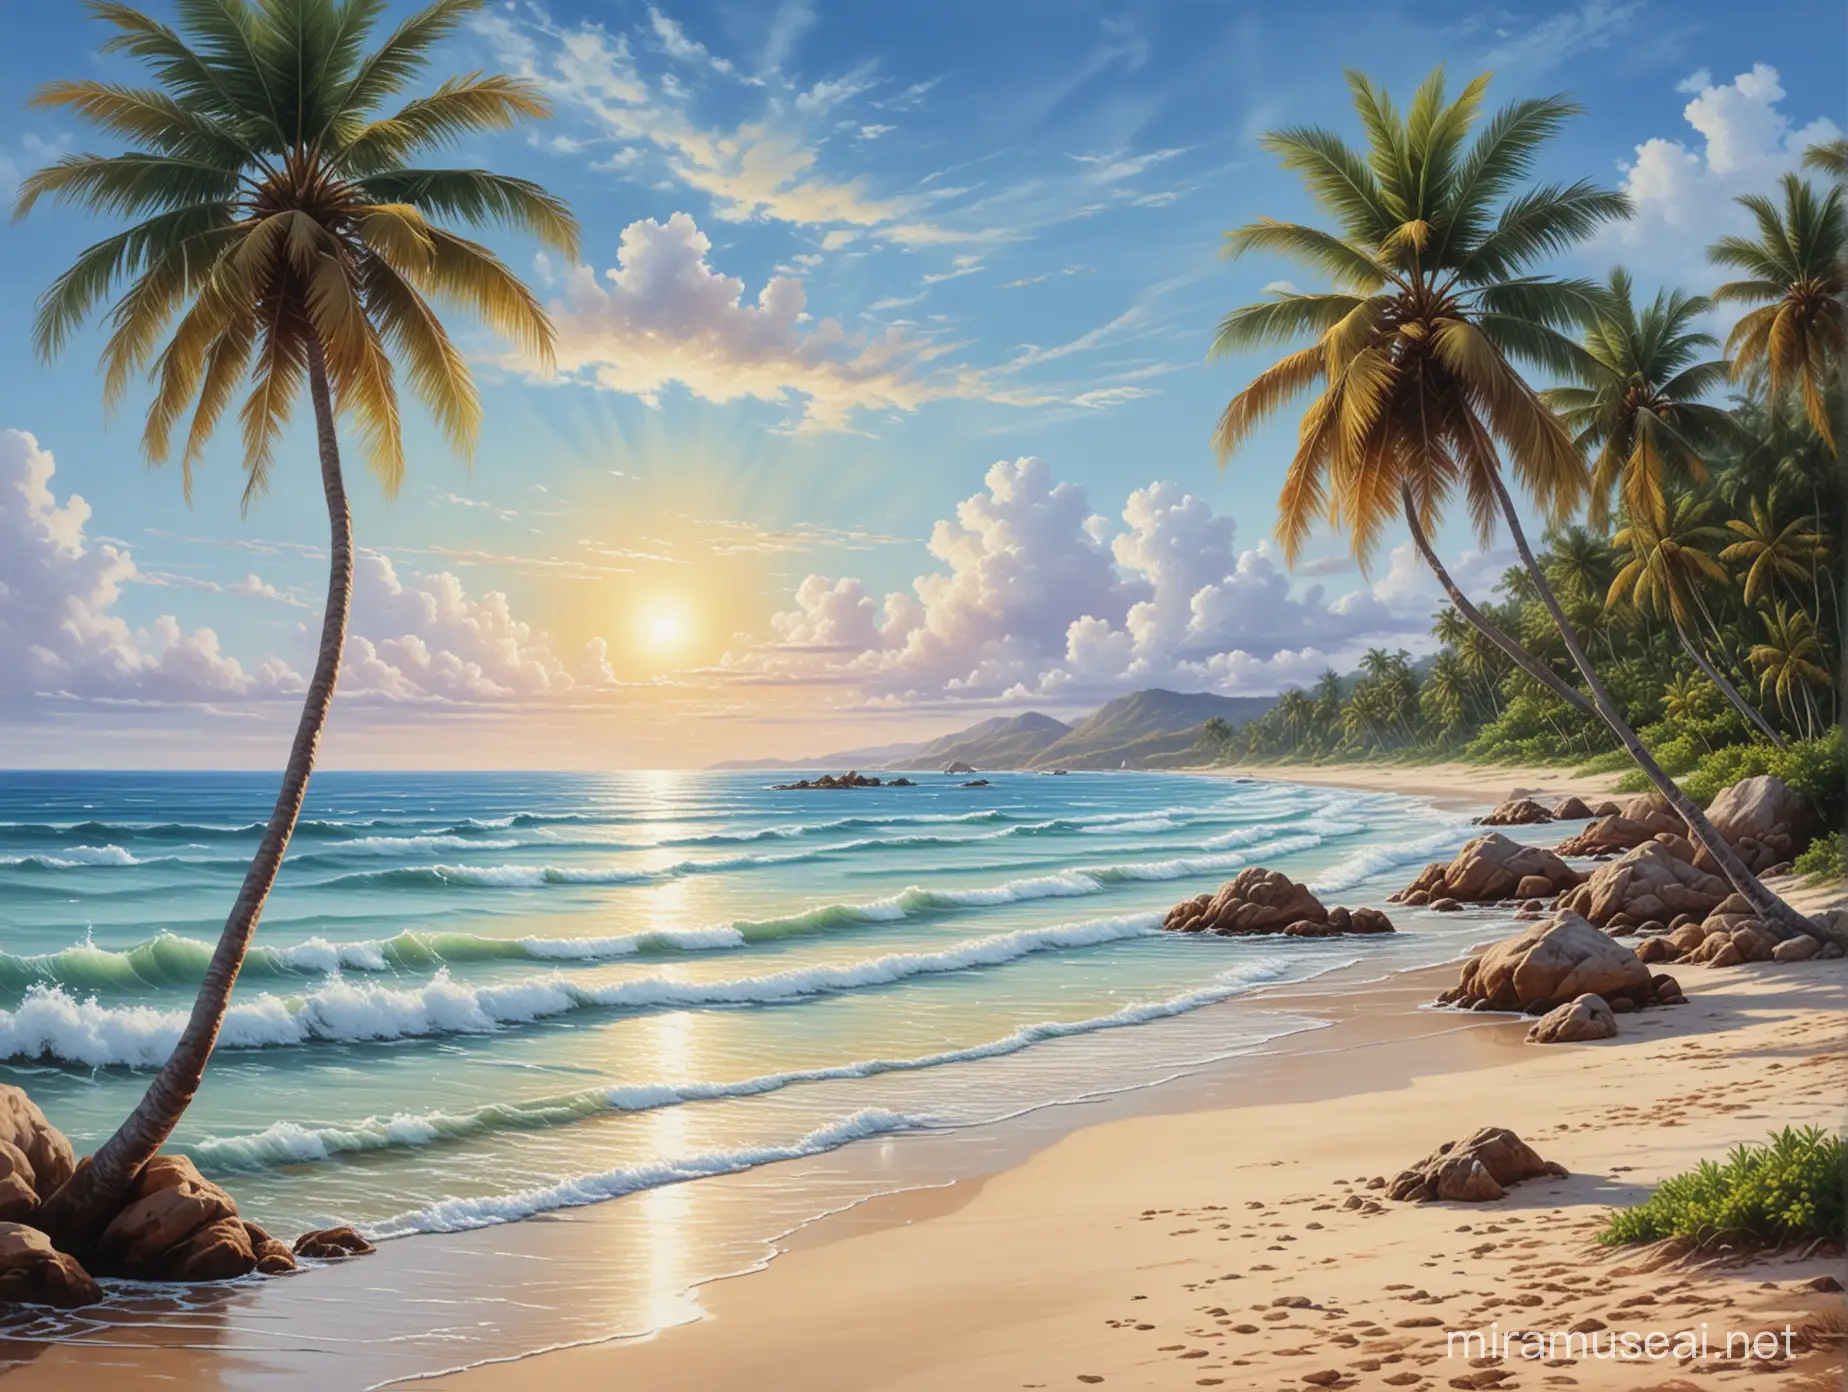 Professional Oil Painting Magnificent Seaside Landscape with Coconut Palms